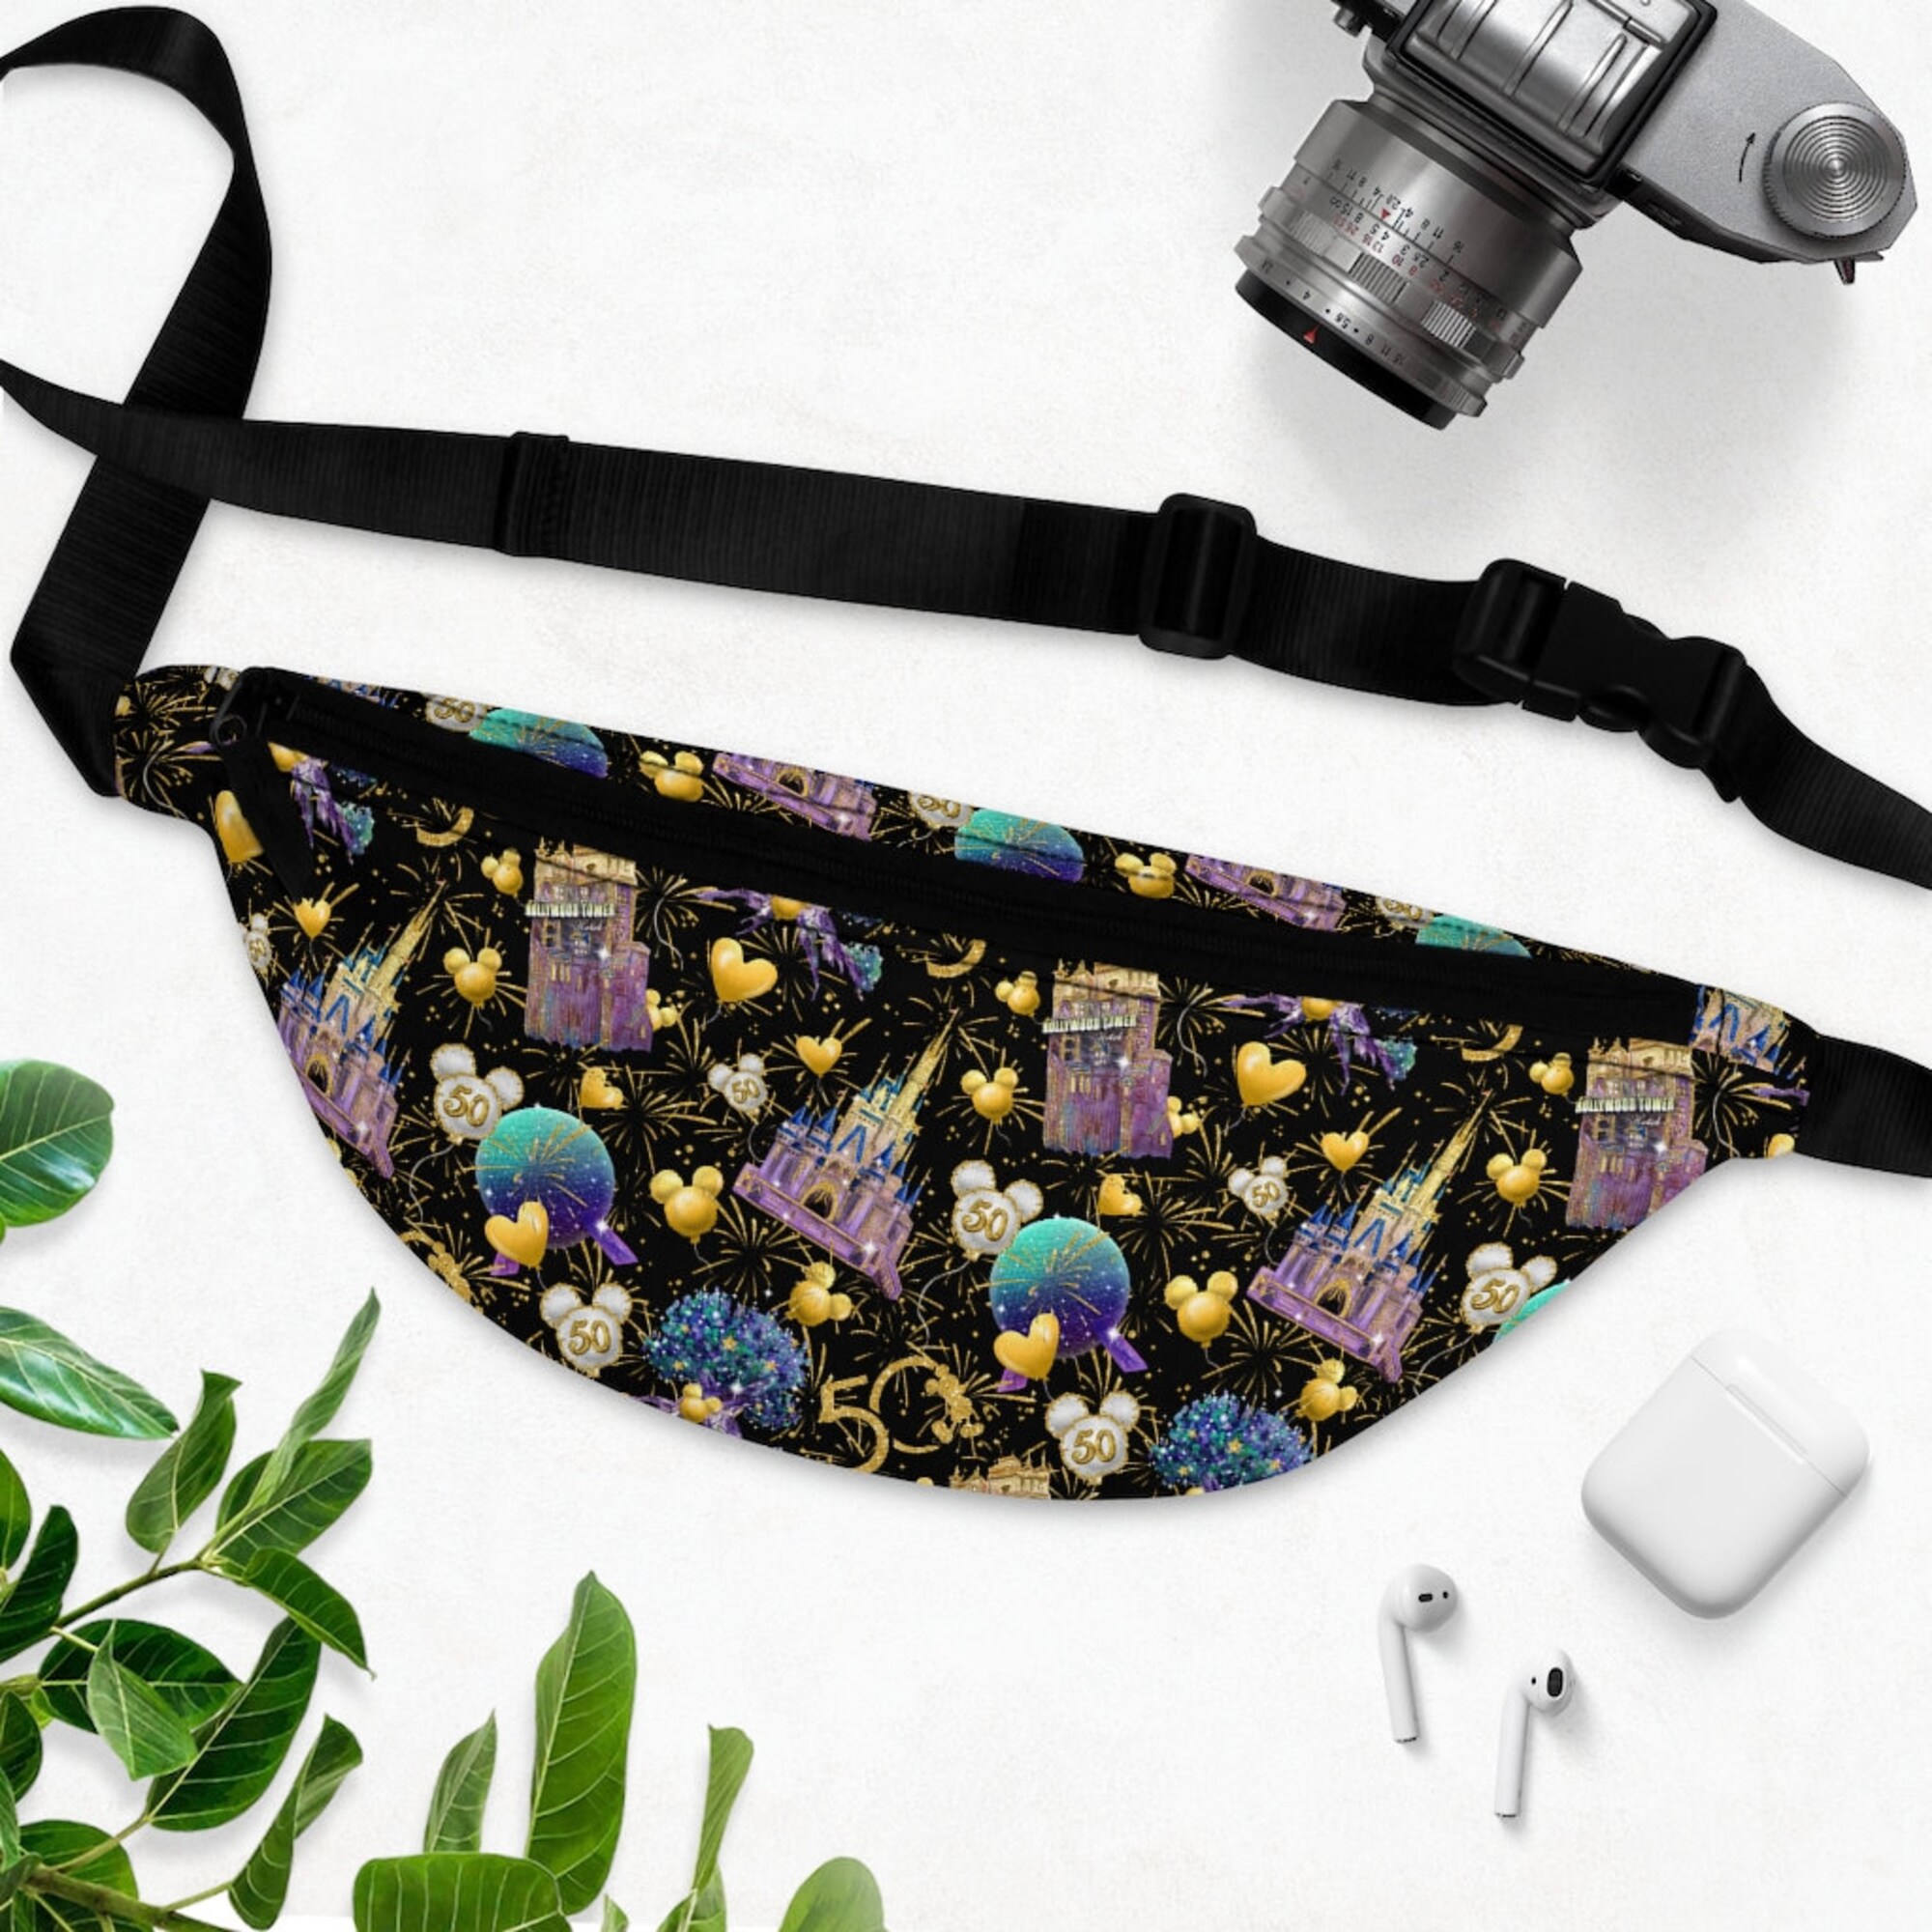 50th Anniversary, Disney Parks inspired Fanny Pack